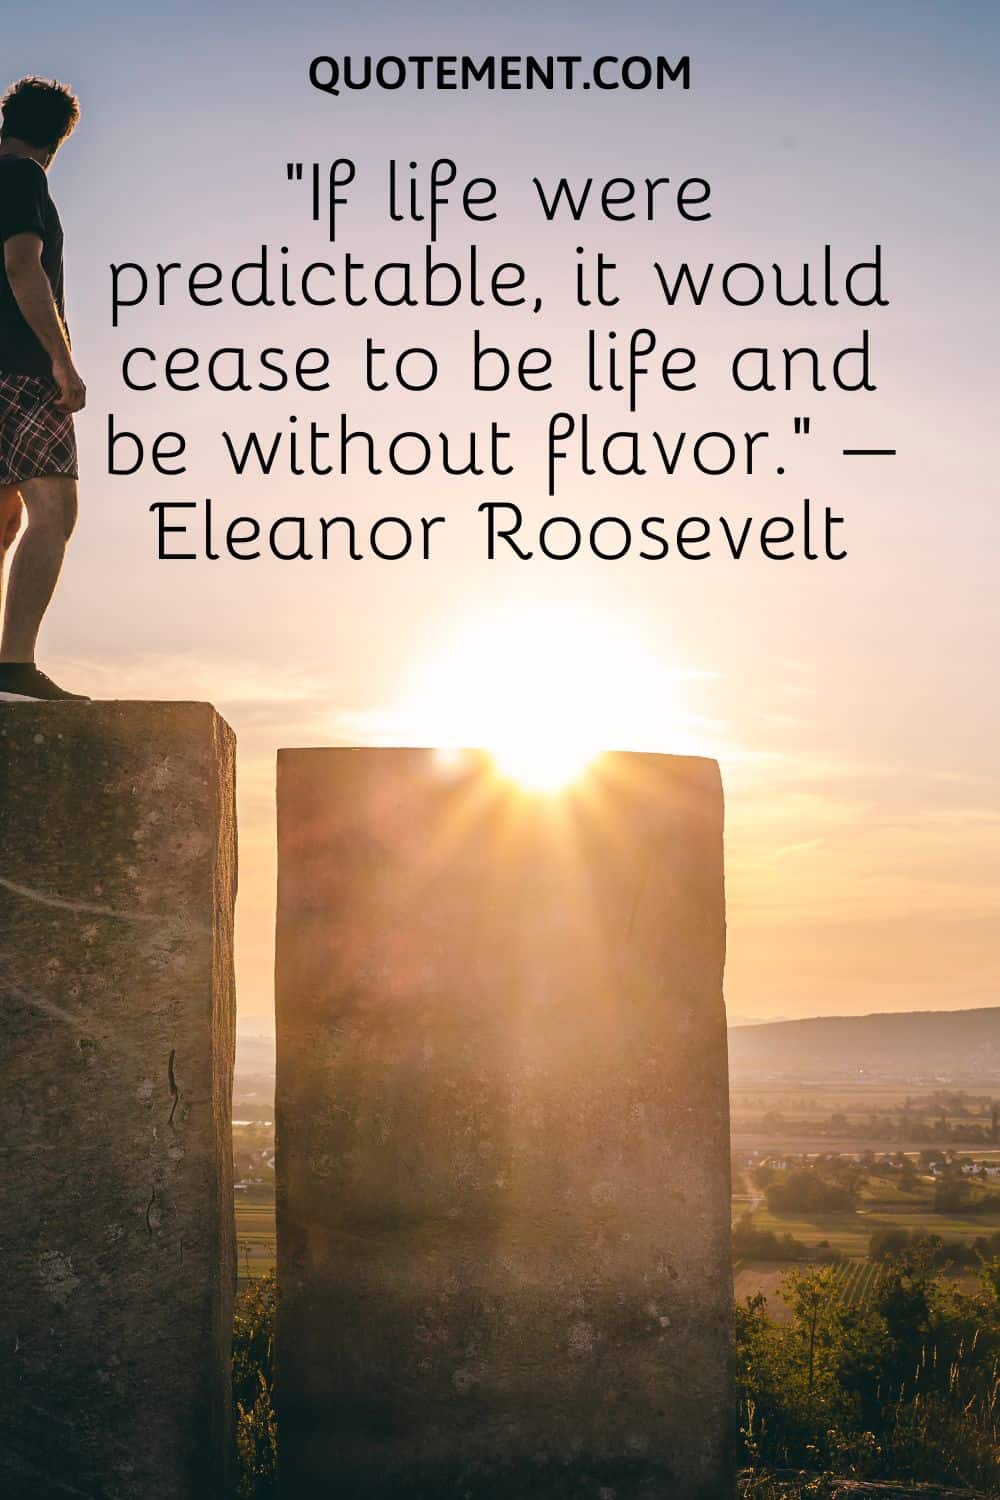 If life were predictable, it would cease to be life and be without flavor